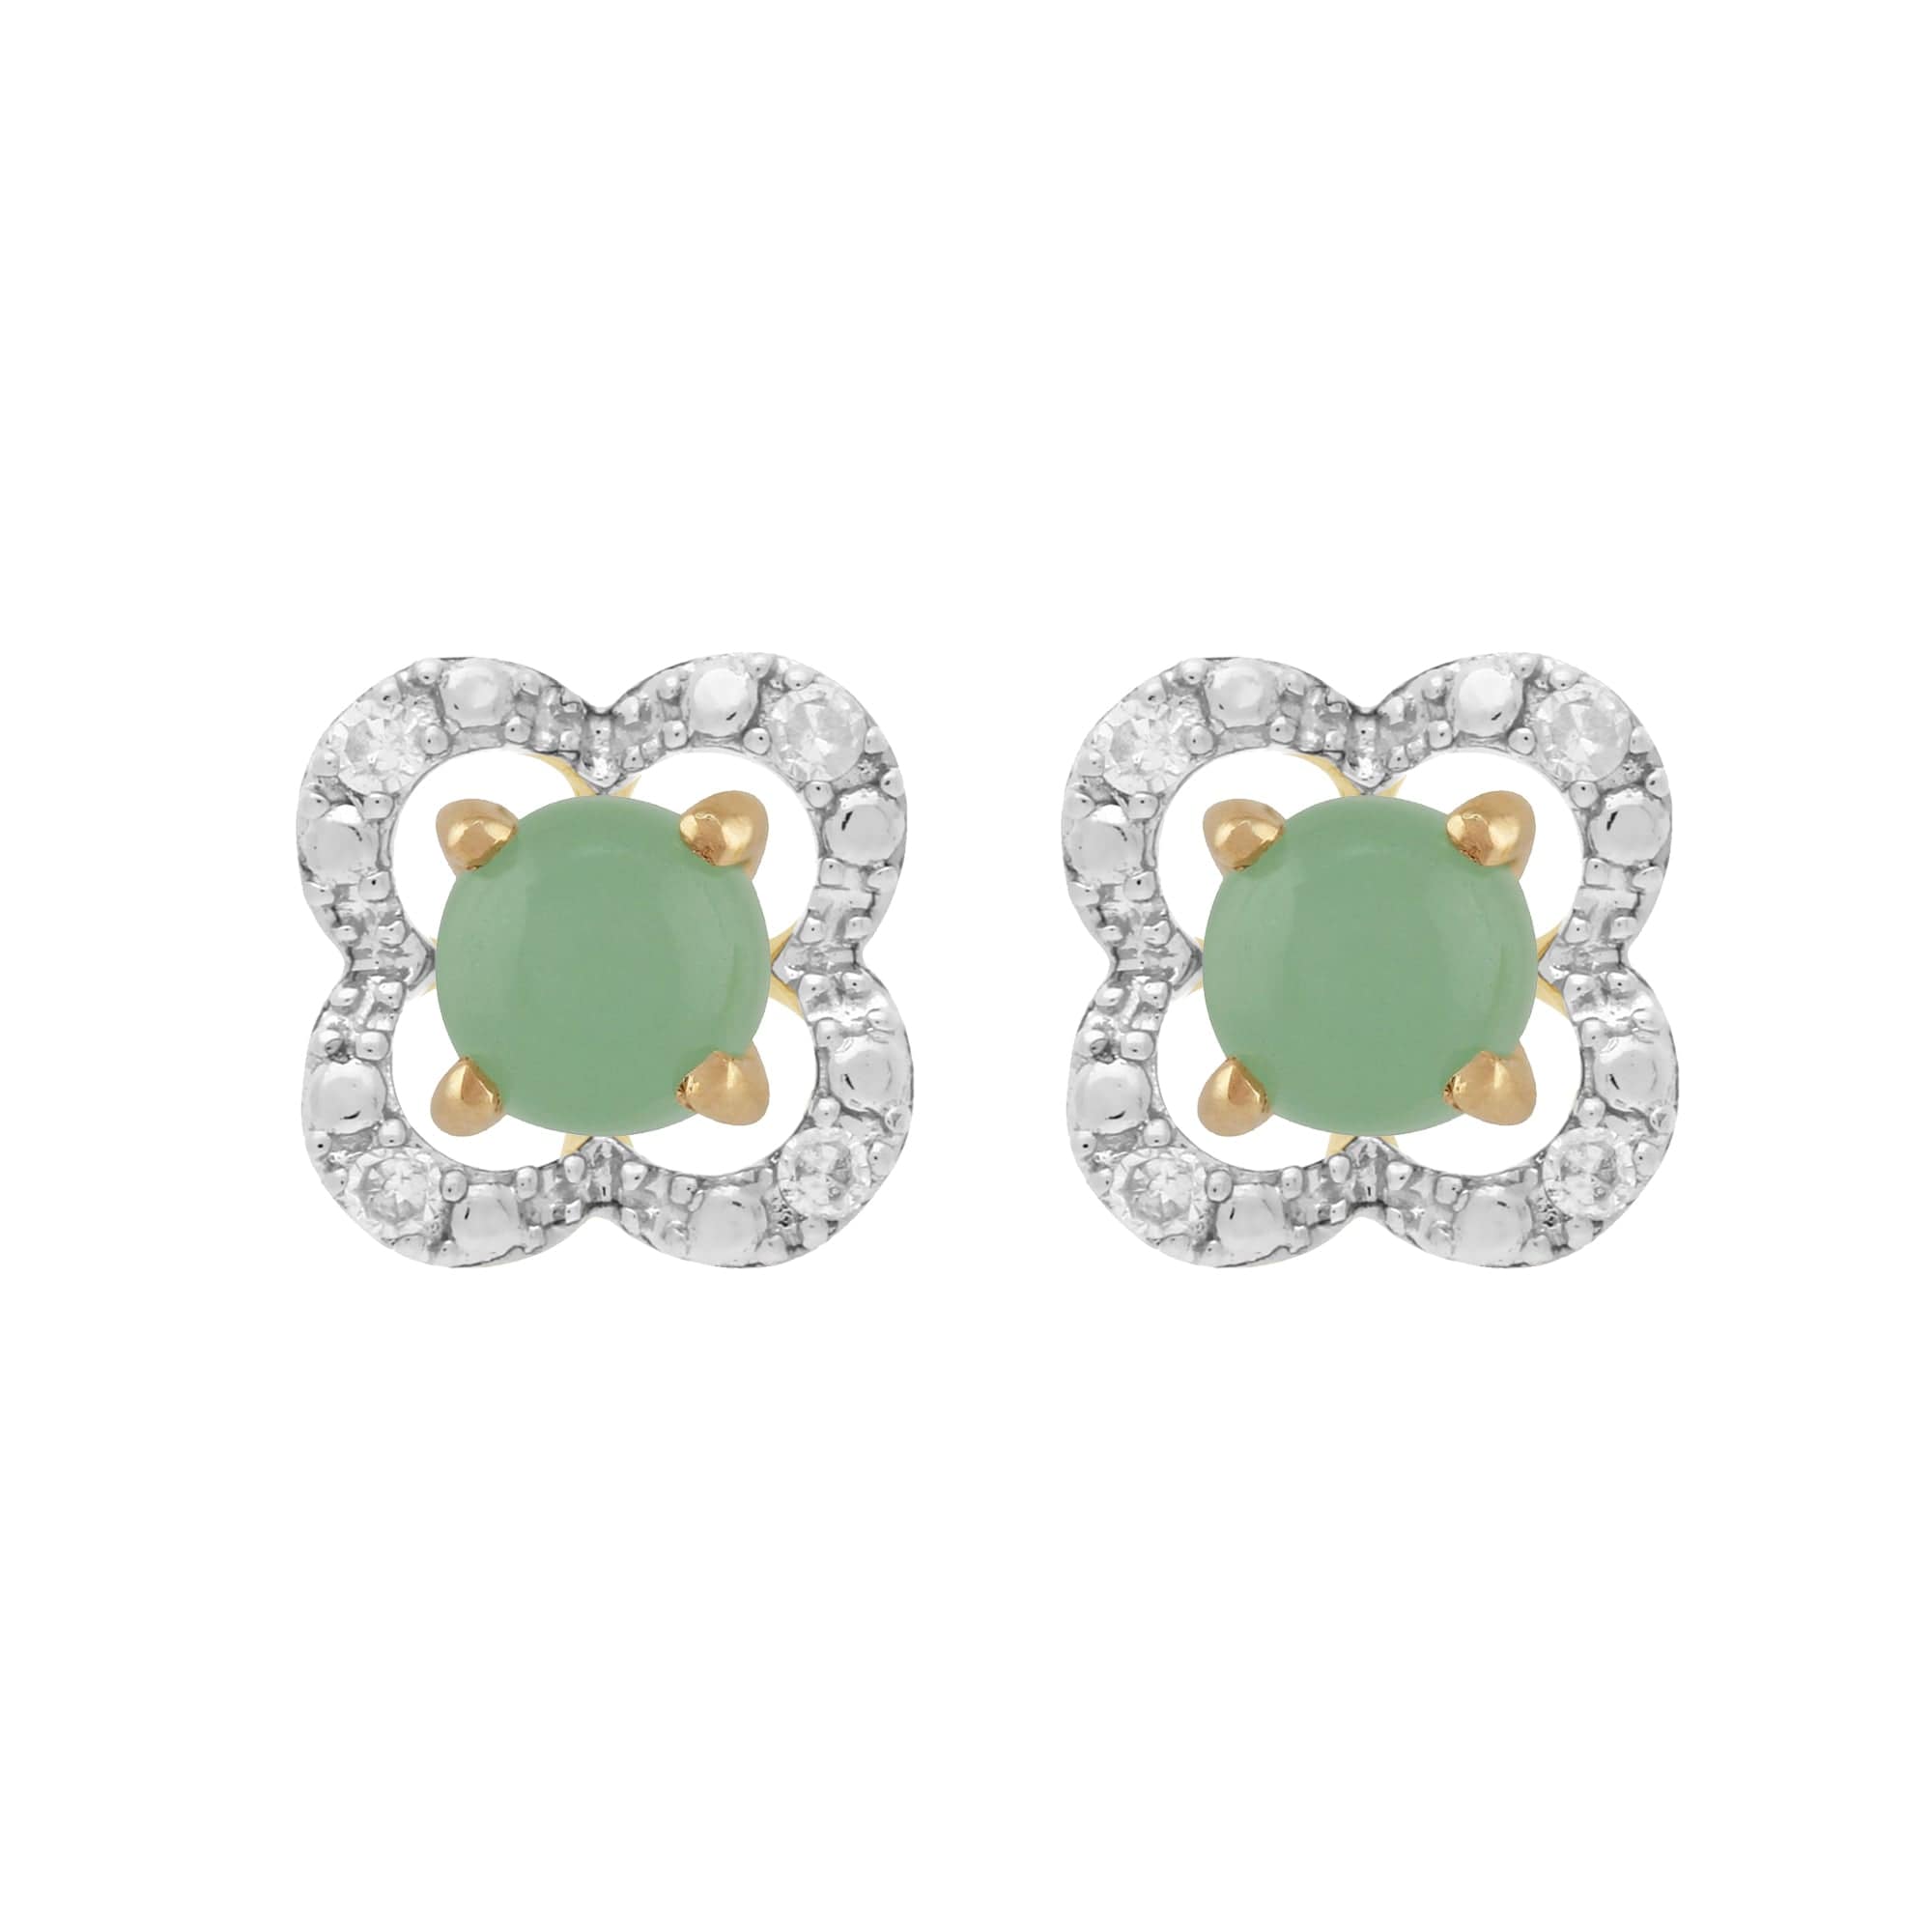 26943-191E0375019 Classic Round Jade Stud Earrings with Detachable Diamond Floral Ear Jacket in 9ct Yellow Gold 1